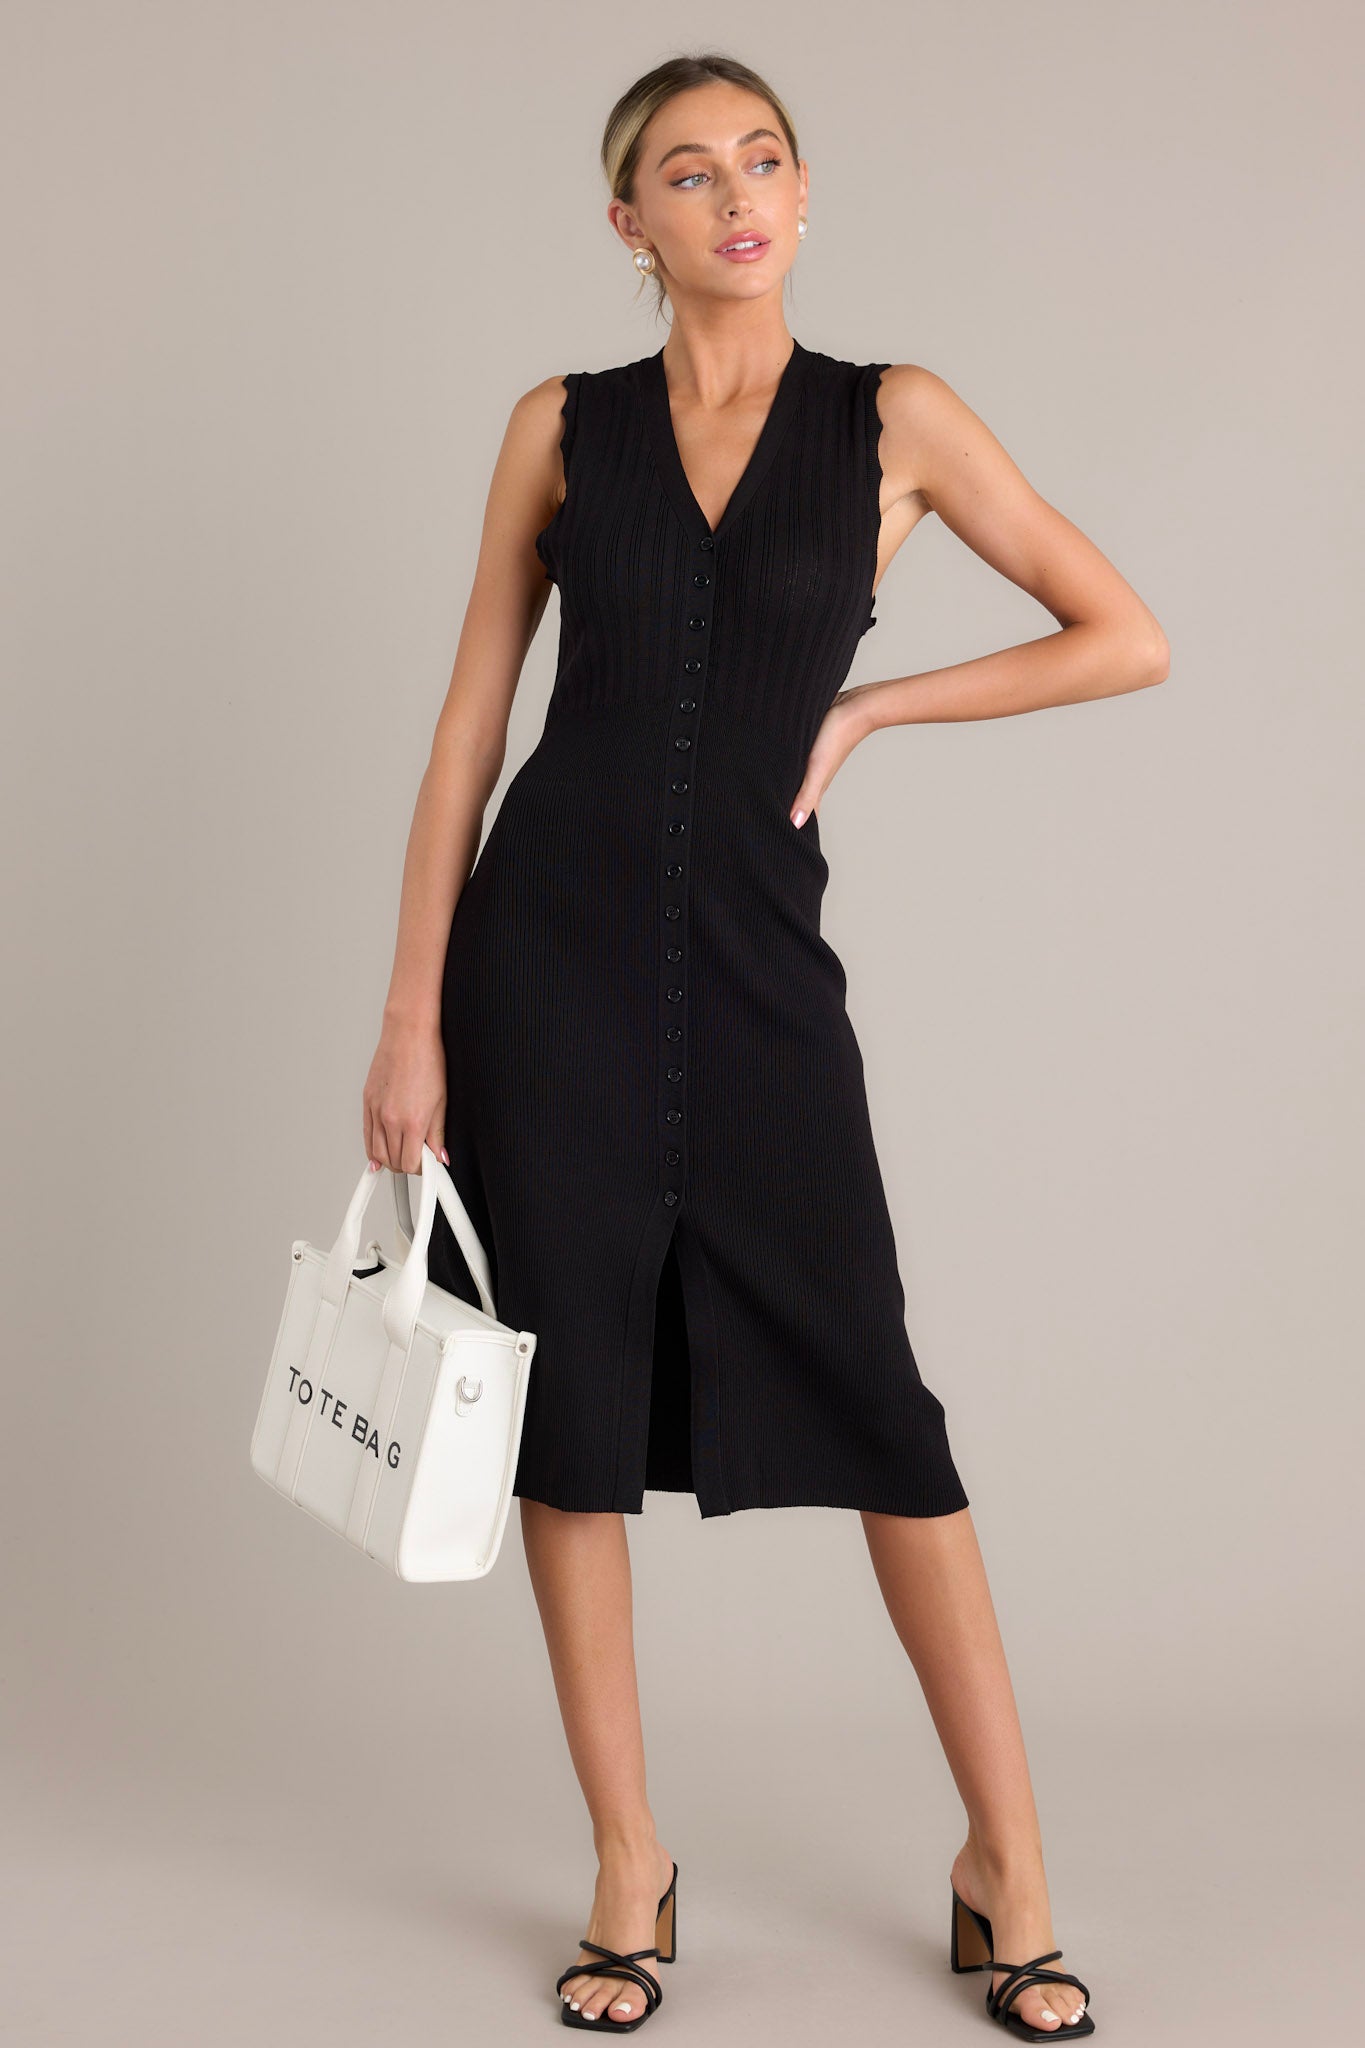 This black dress features a v-neckline, a functional button front, a front slit, and scalloped sleeves.